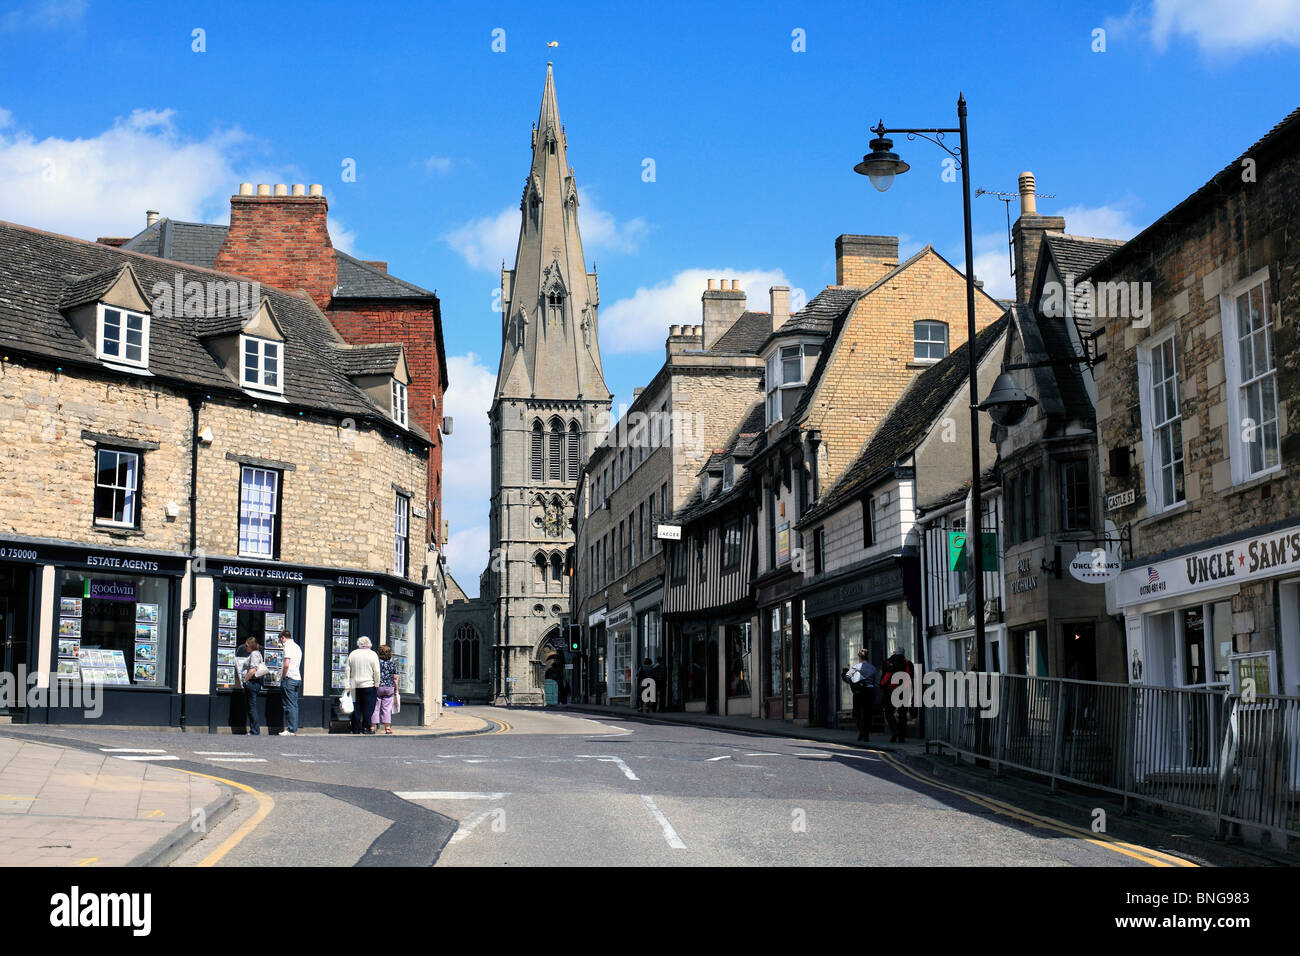 Looking towards St. Mary's St. (ahead) and St. Mary's Church in Stamford town centre, Lincolnshire. Stock Photo